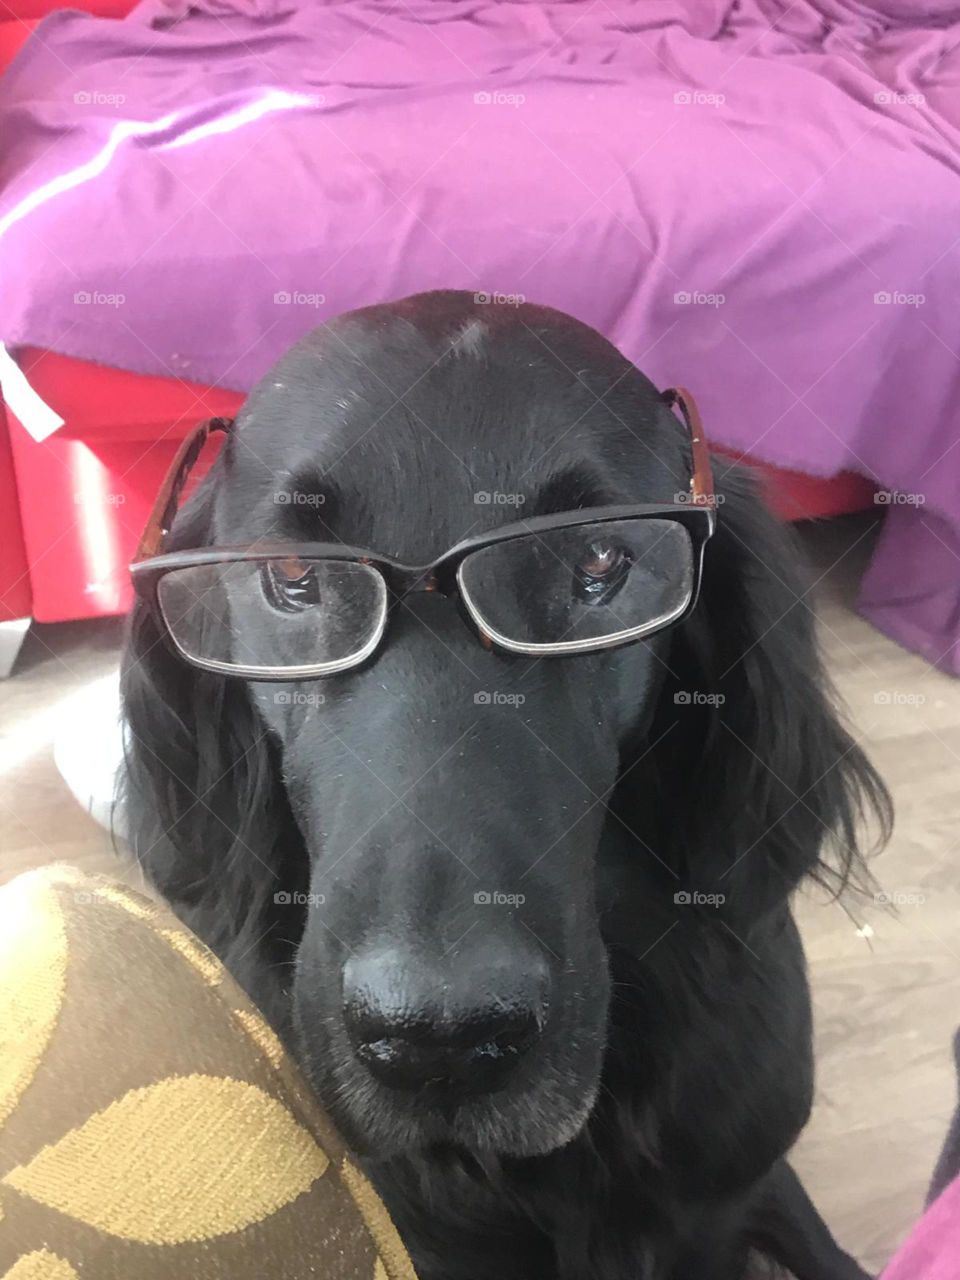 Black flatcoat retriever looking highly intelligent and comical in a pair of glasses. Colourful background.